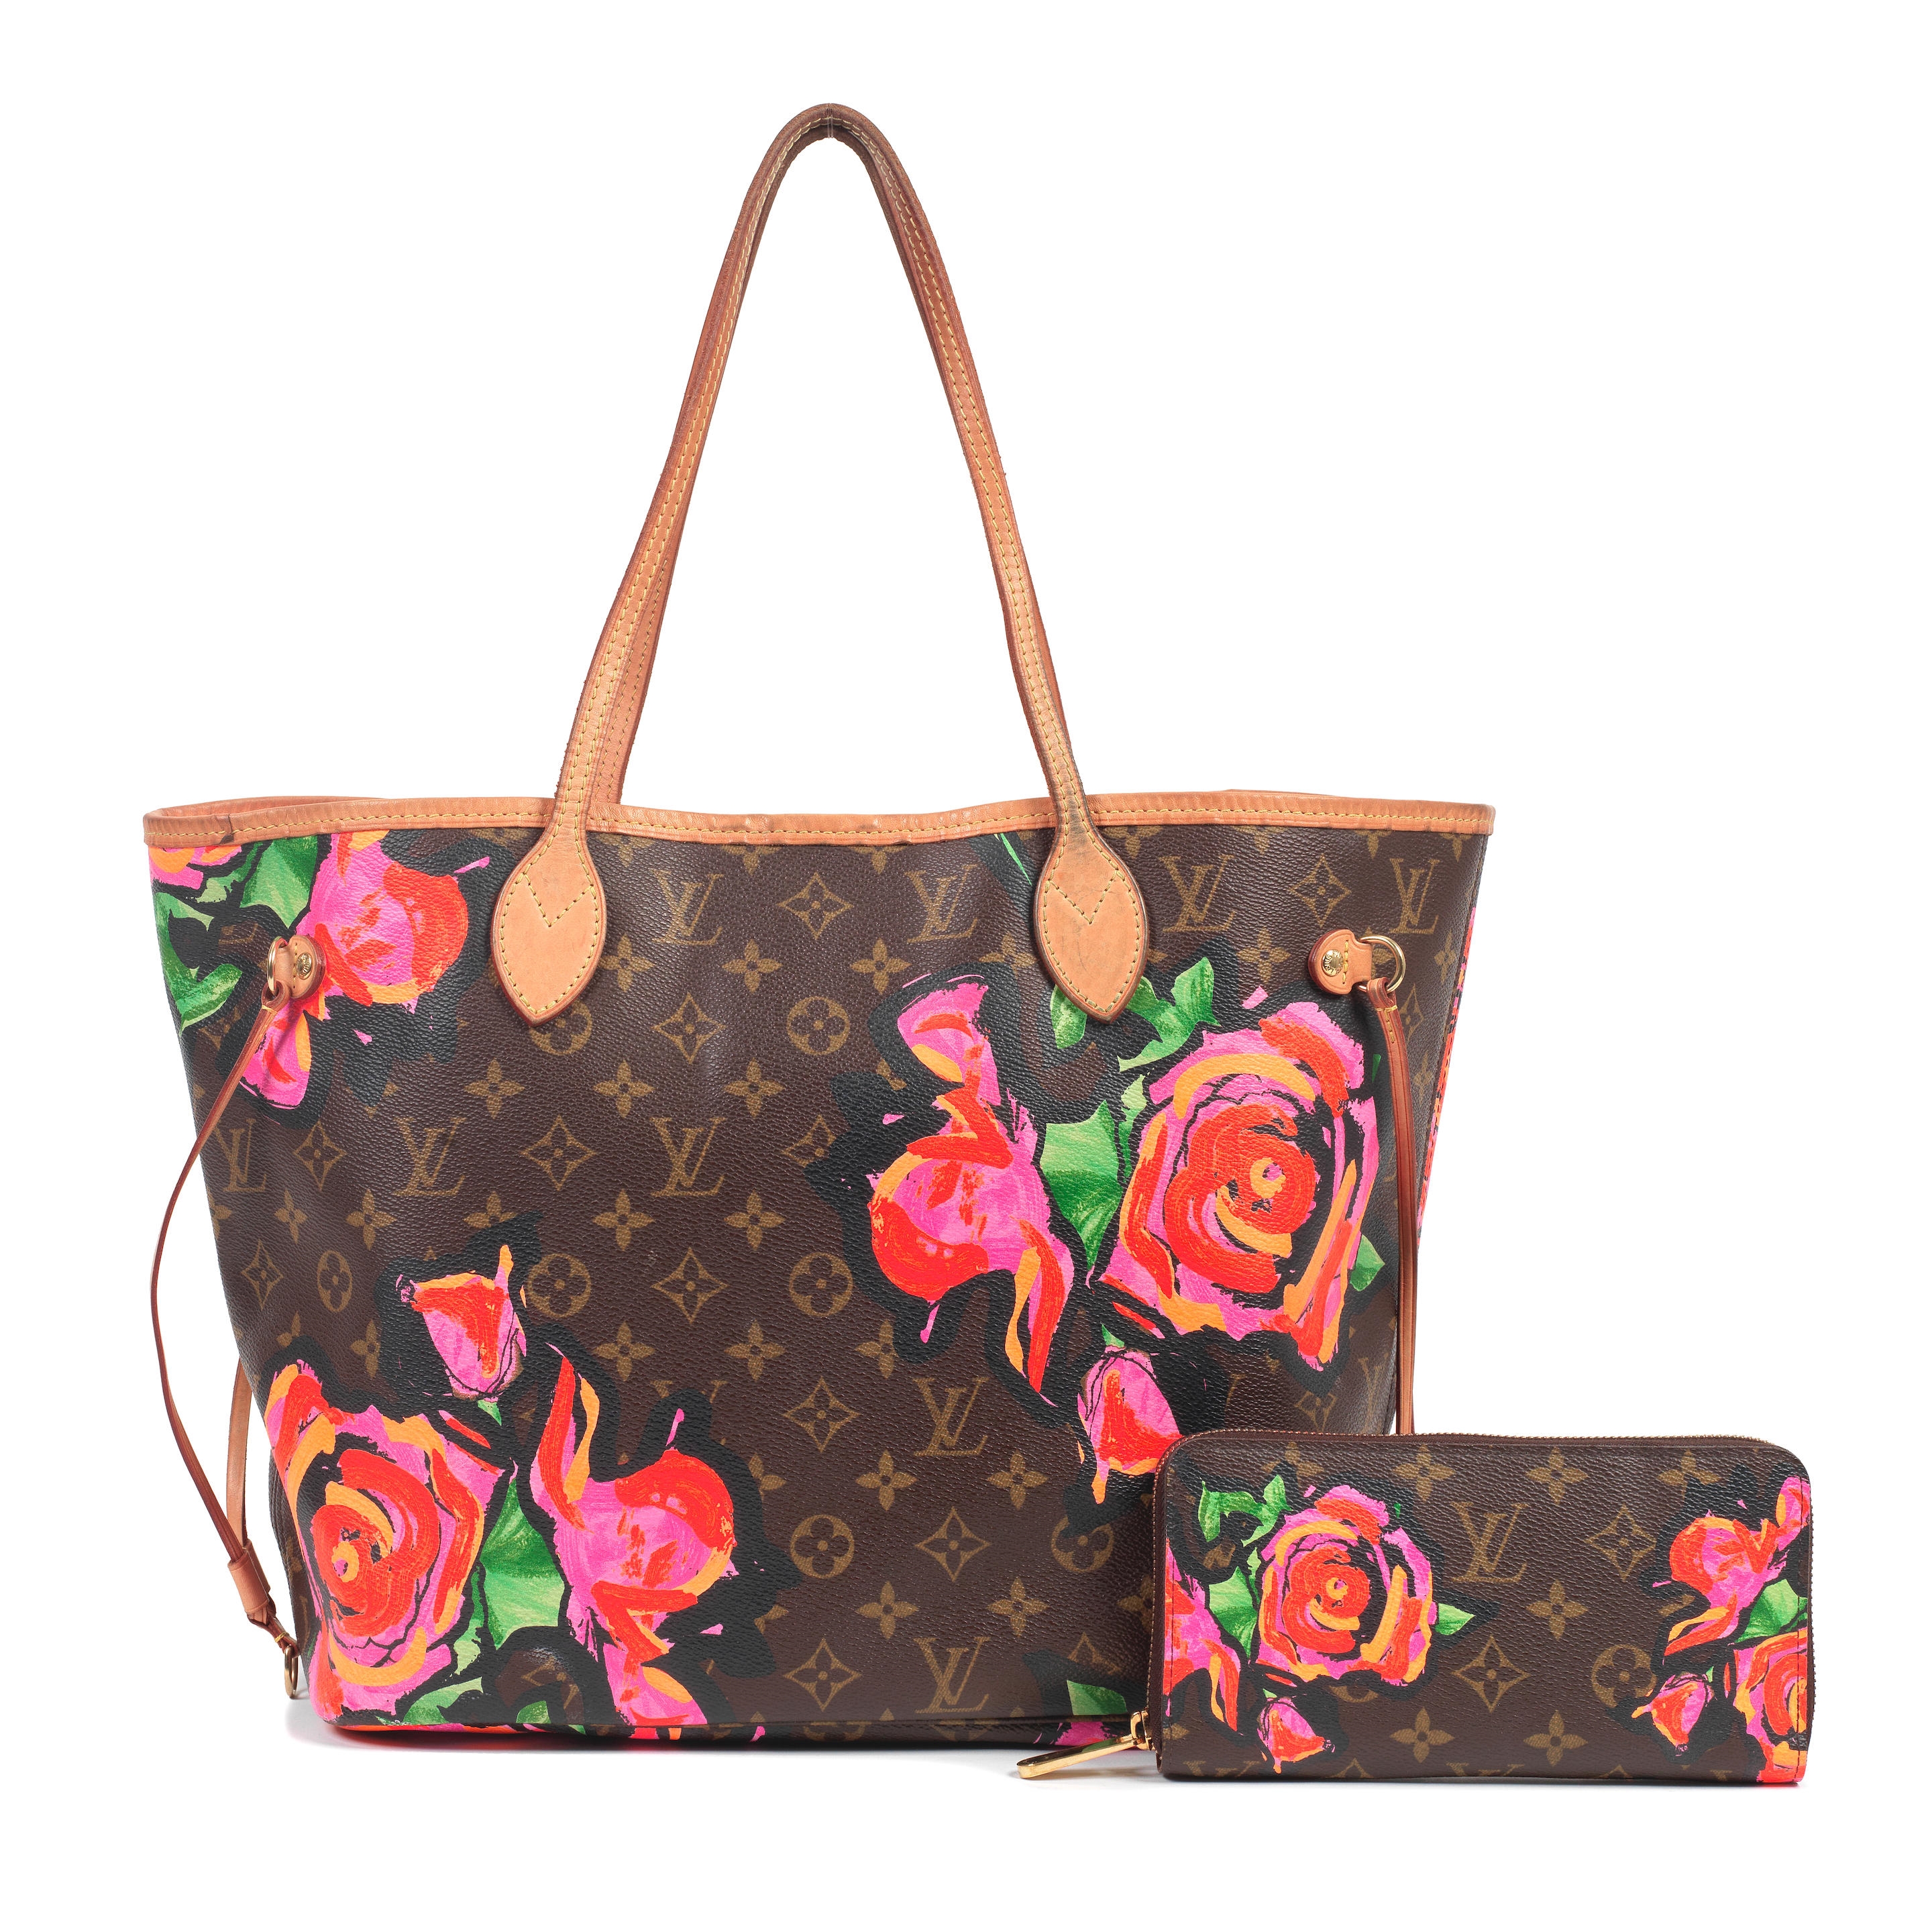 Sold at Auction: Stephen Sprouse, Stephen Sprouse Louis Vuitton